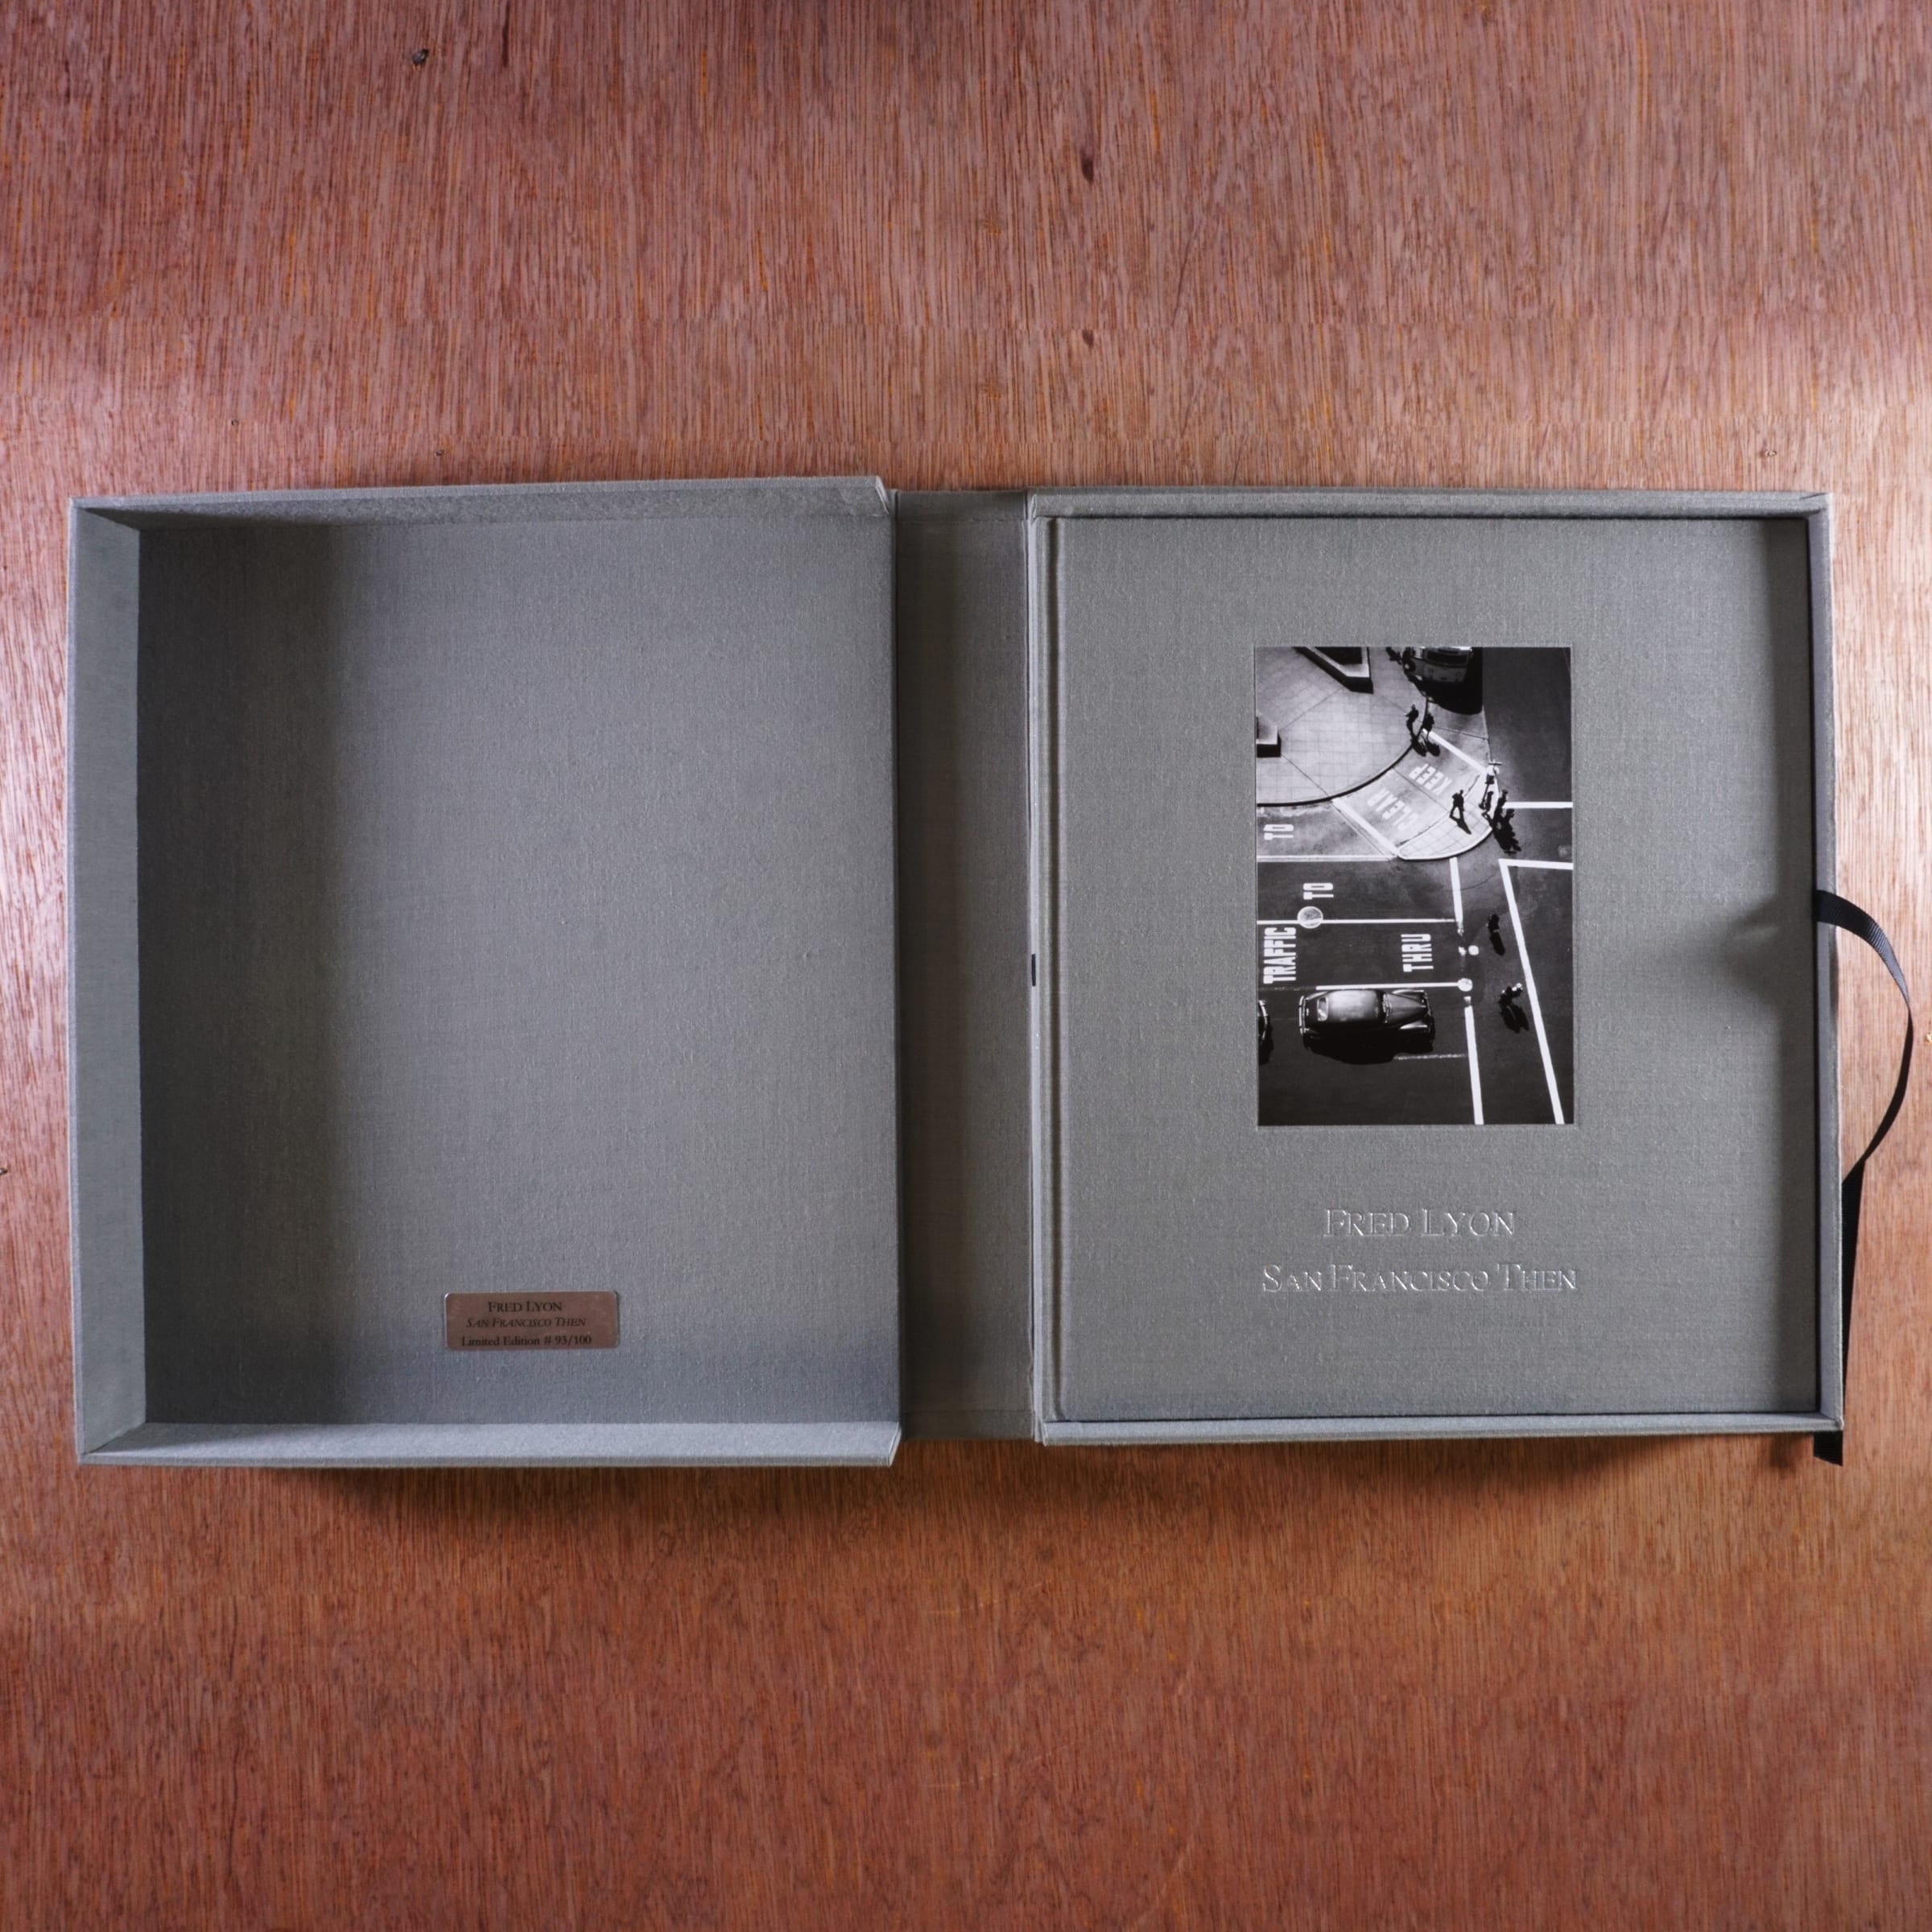 Publication: Fred Lyon - San Francisco Then (Collector's Edition with ...